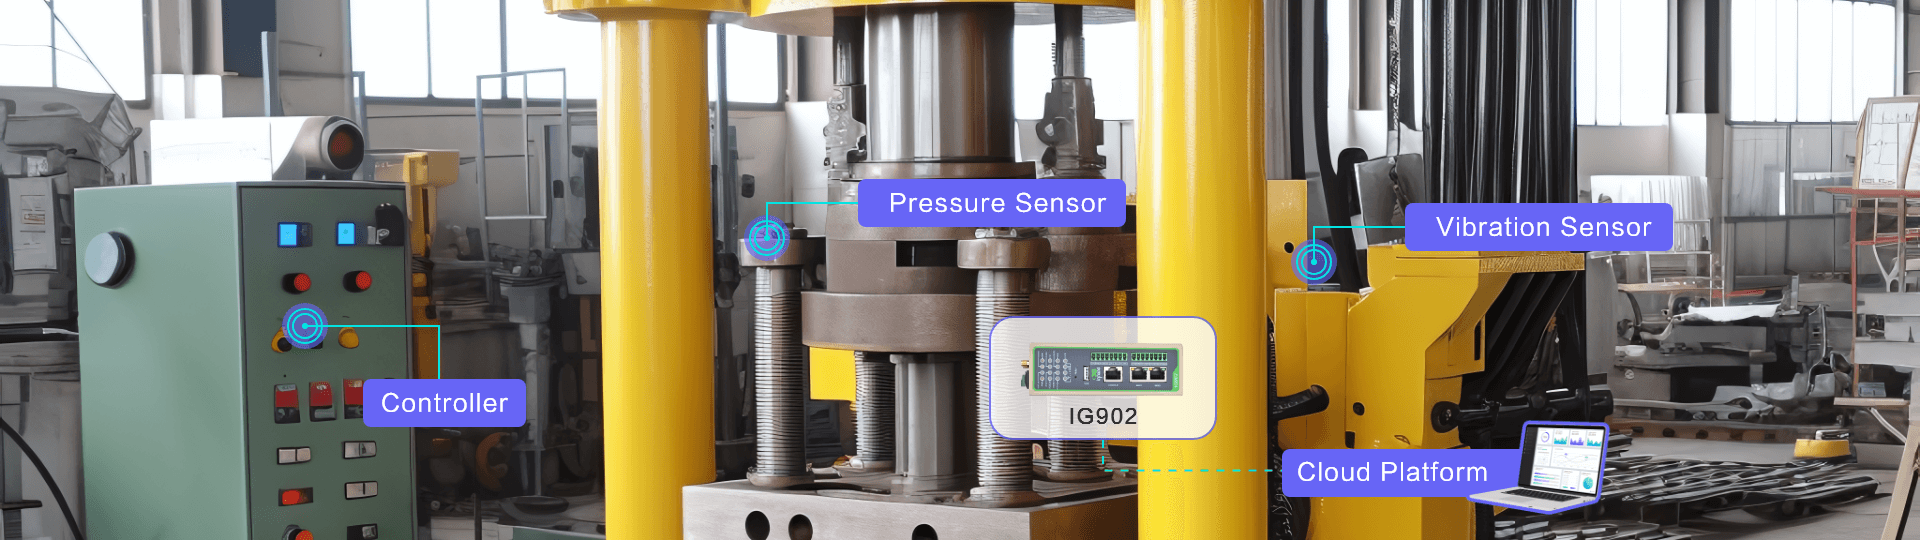 InHand's Remote Monitoring Solution of Hydraulic Press